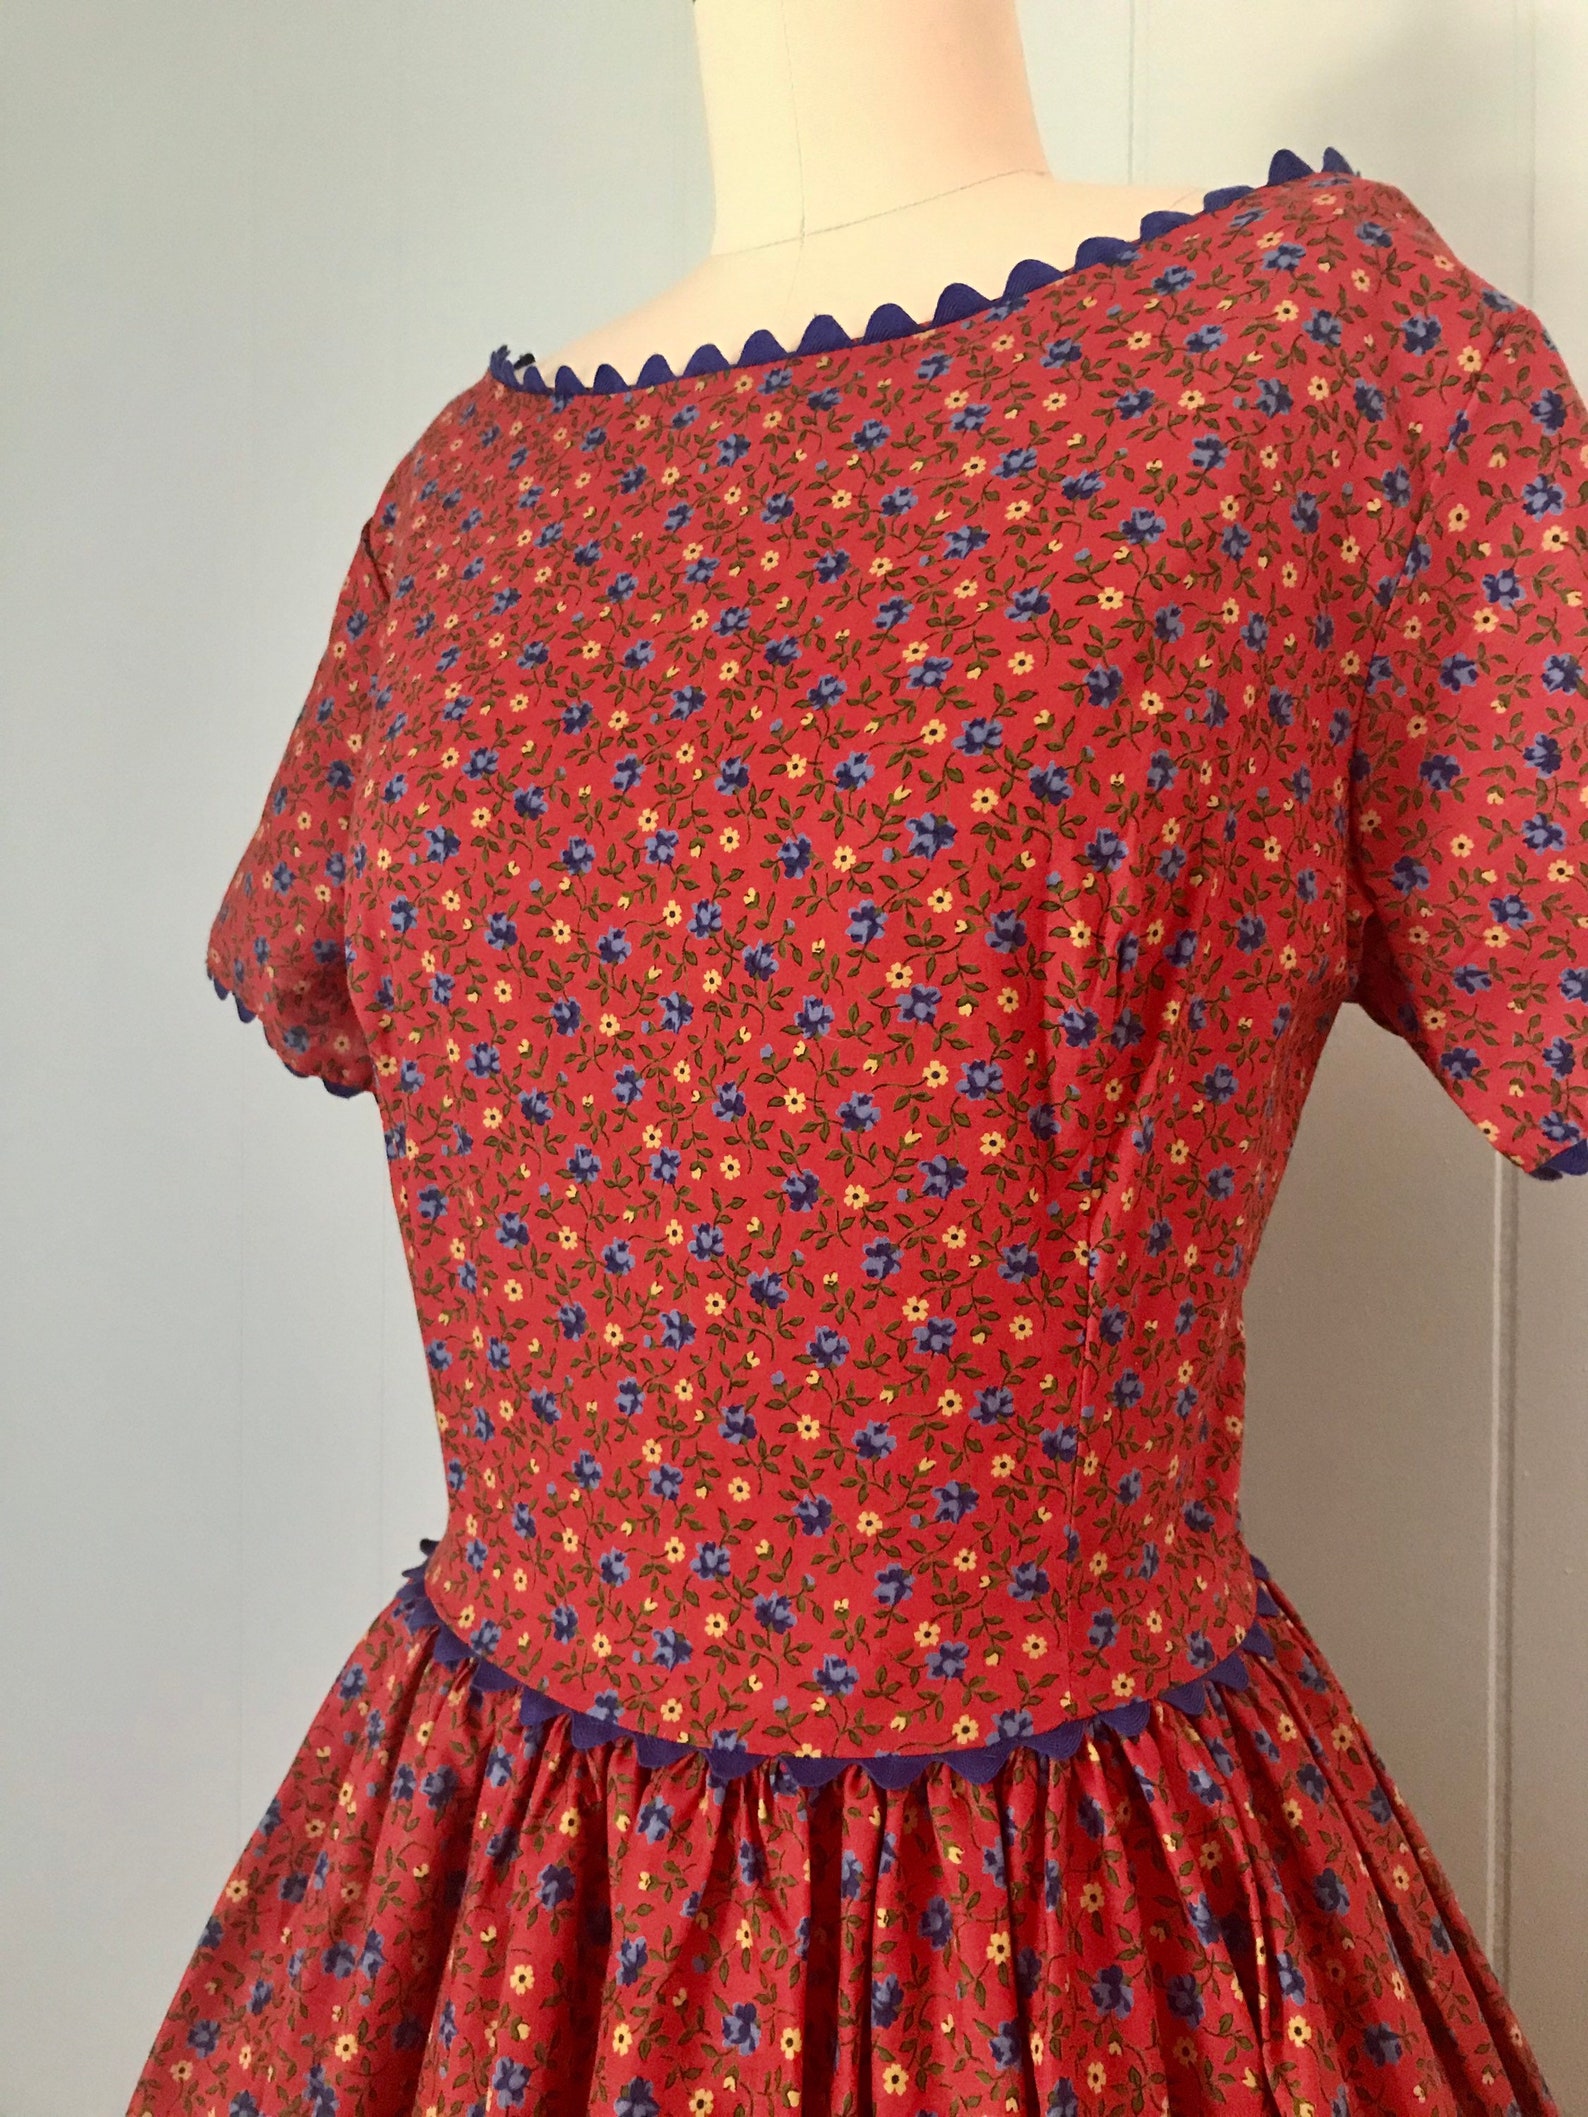 1950s Montgomery Ward Bright Red Dress 50s Floral Fit and - Etsy